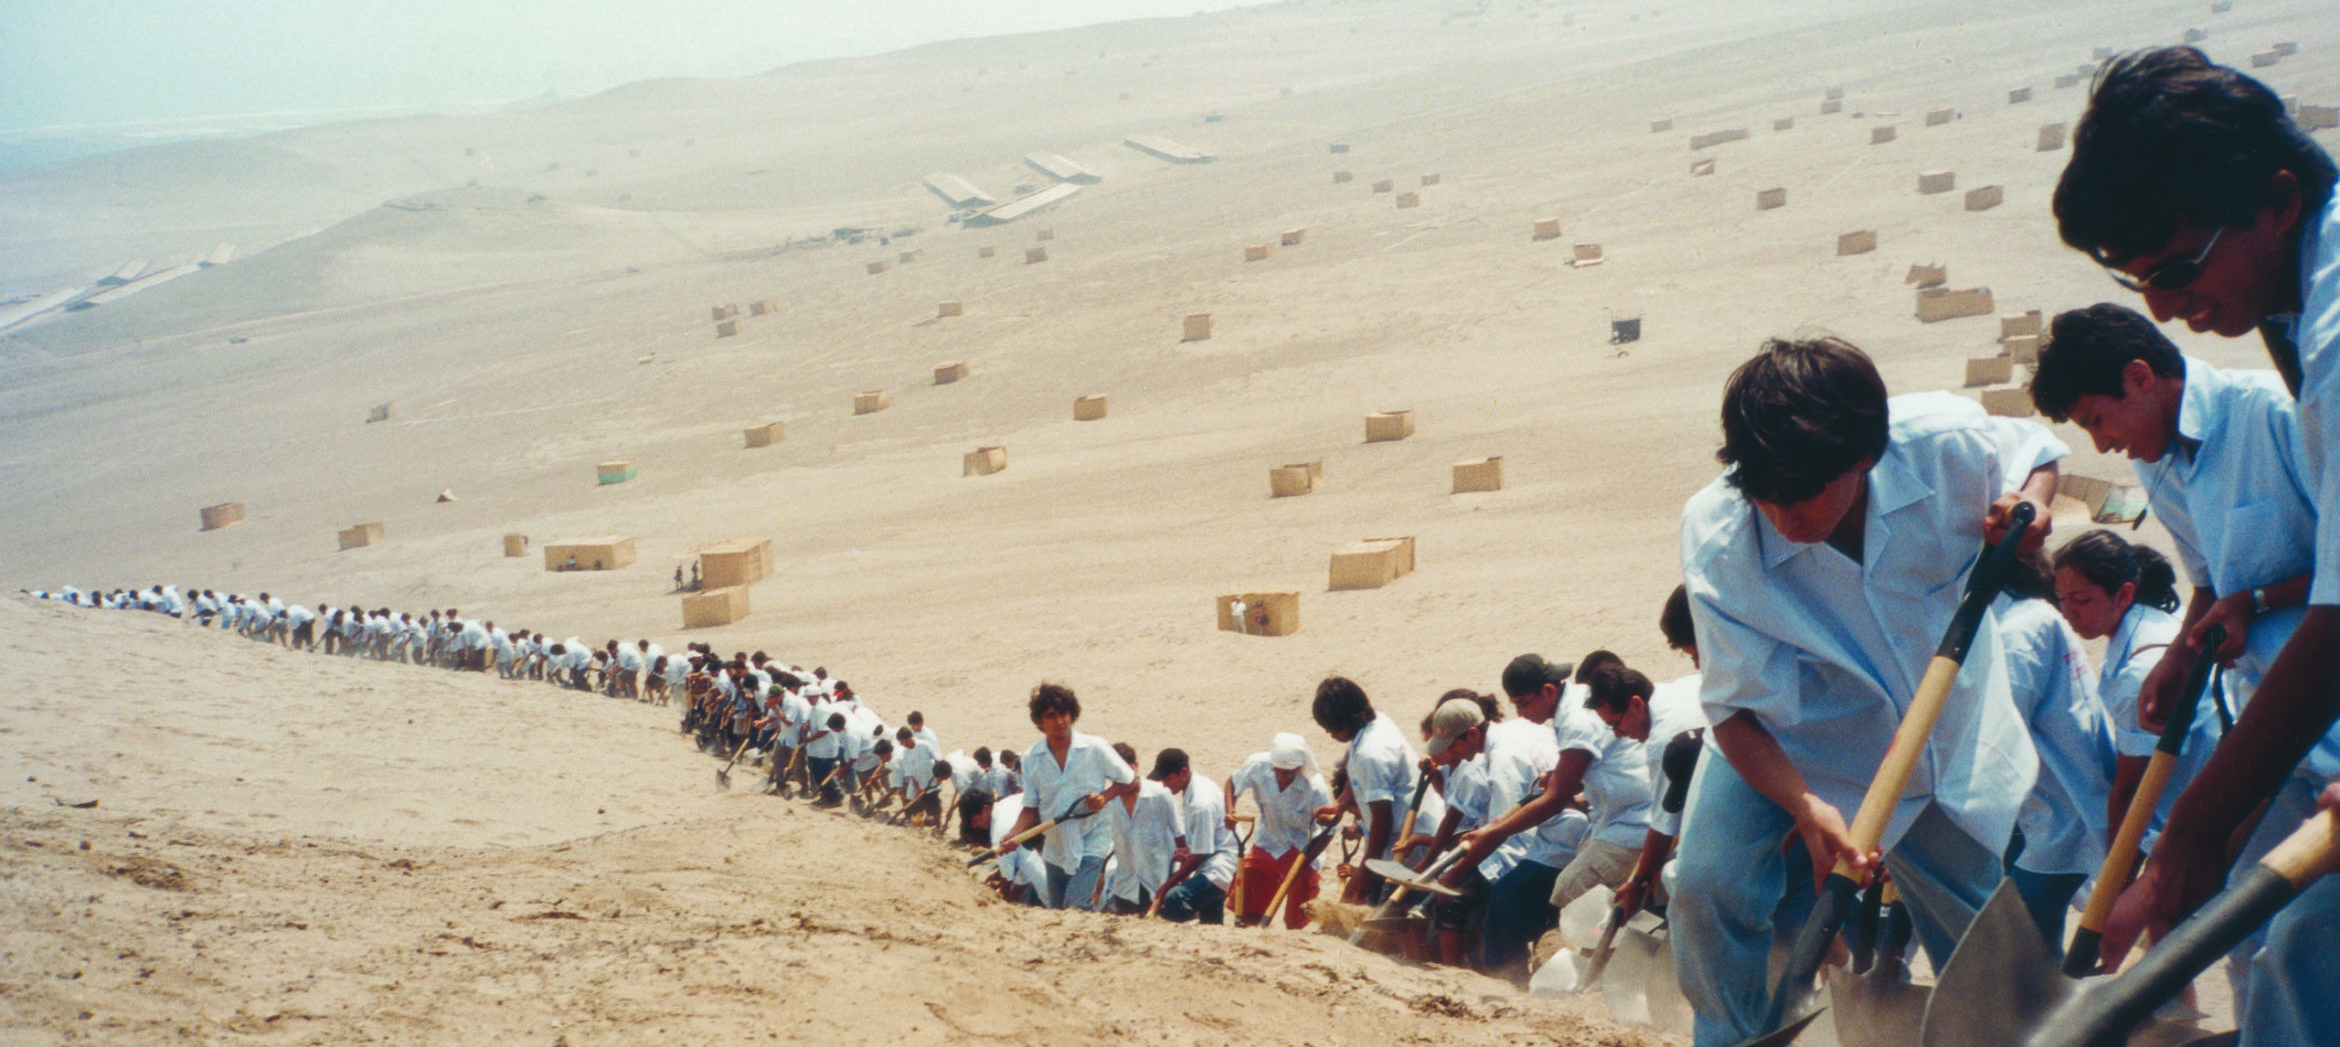 A line of hundreds of participants in artist Francis Alys's "When Faith Moves Mountains." They are assembled on a sand dune with shovels in hand